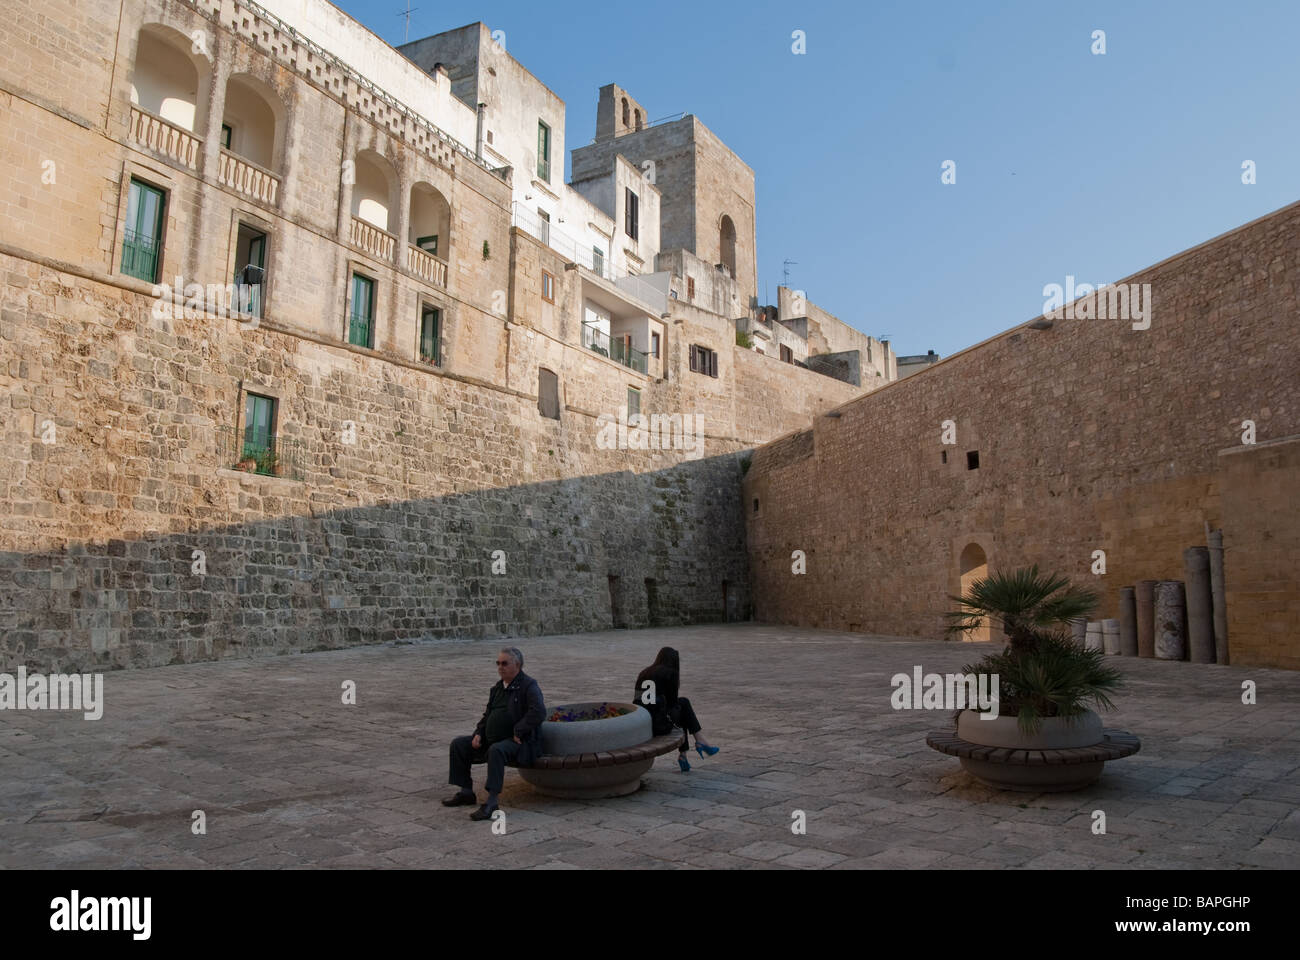 The entrance to the old town Otranto Italy Stock Photo